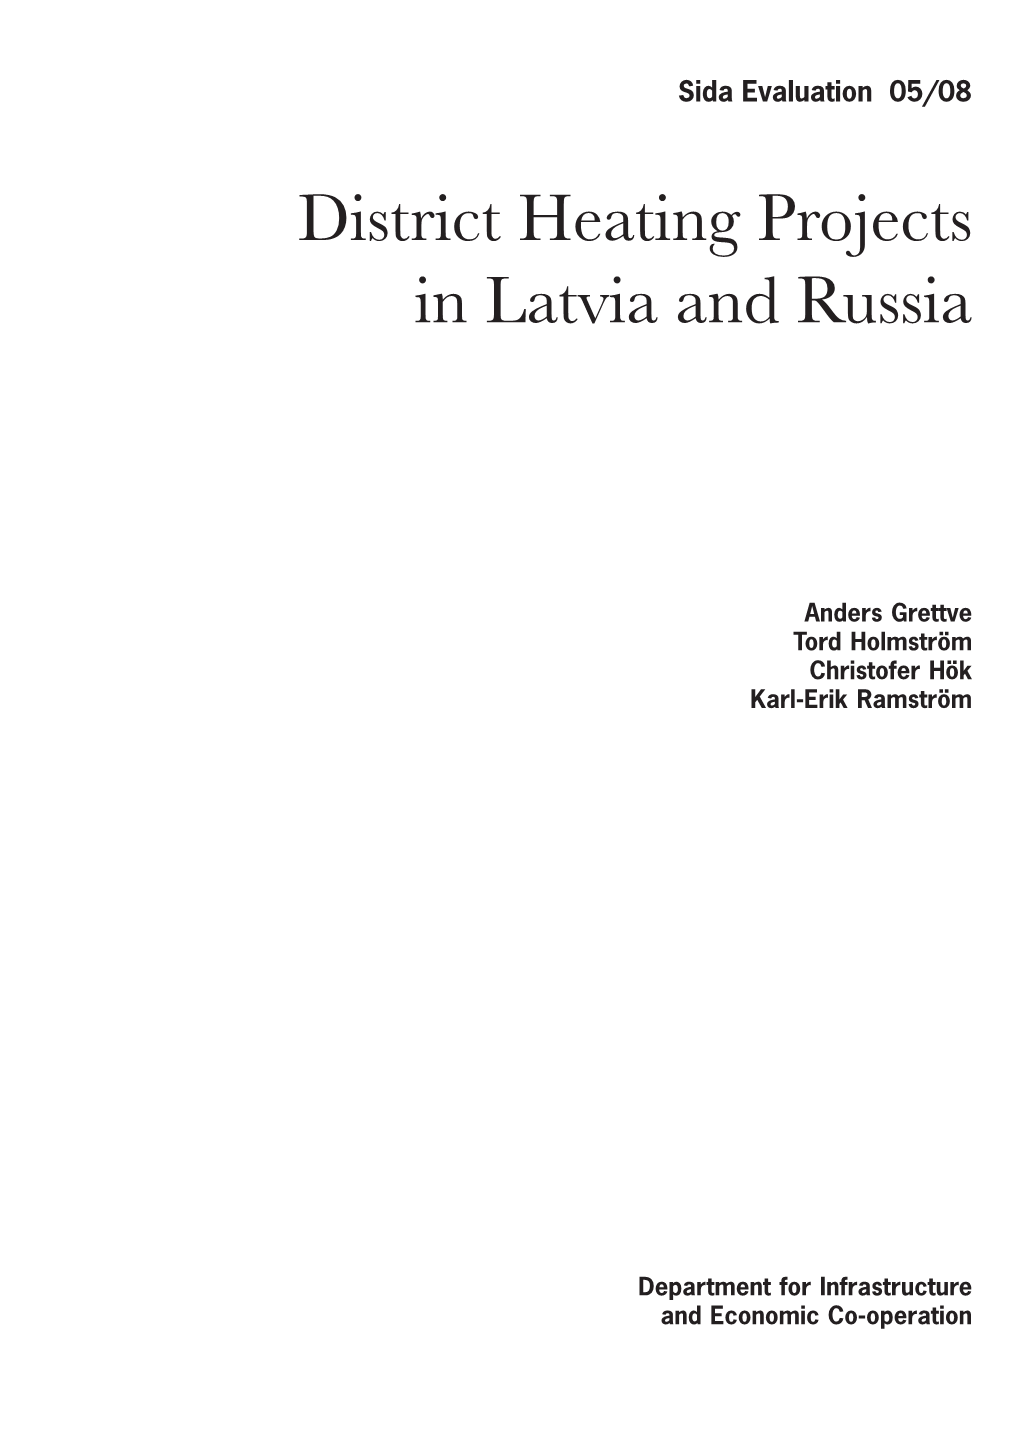 District Heating Projects in Latvia and Russia